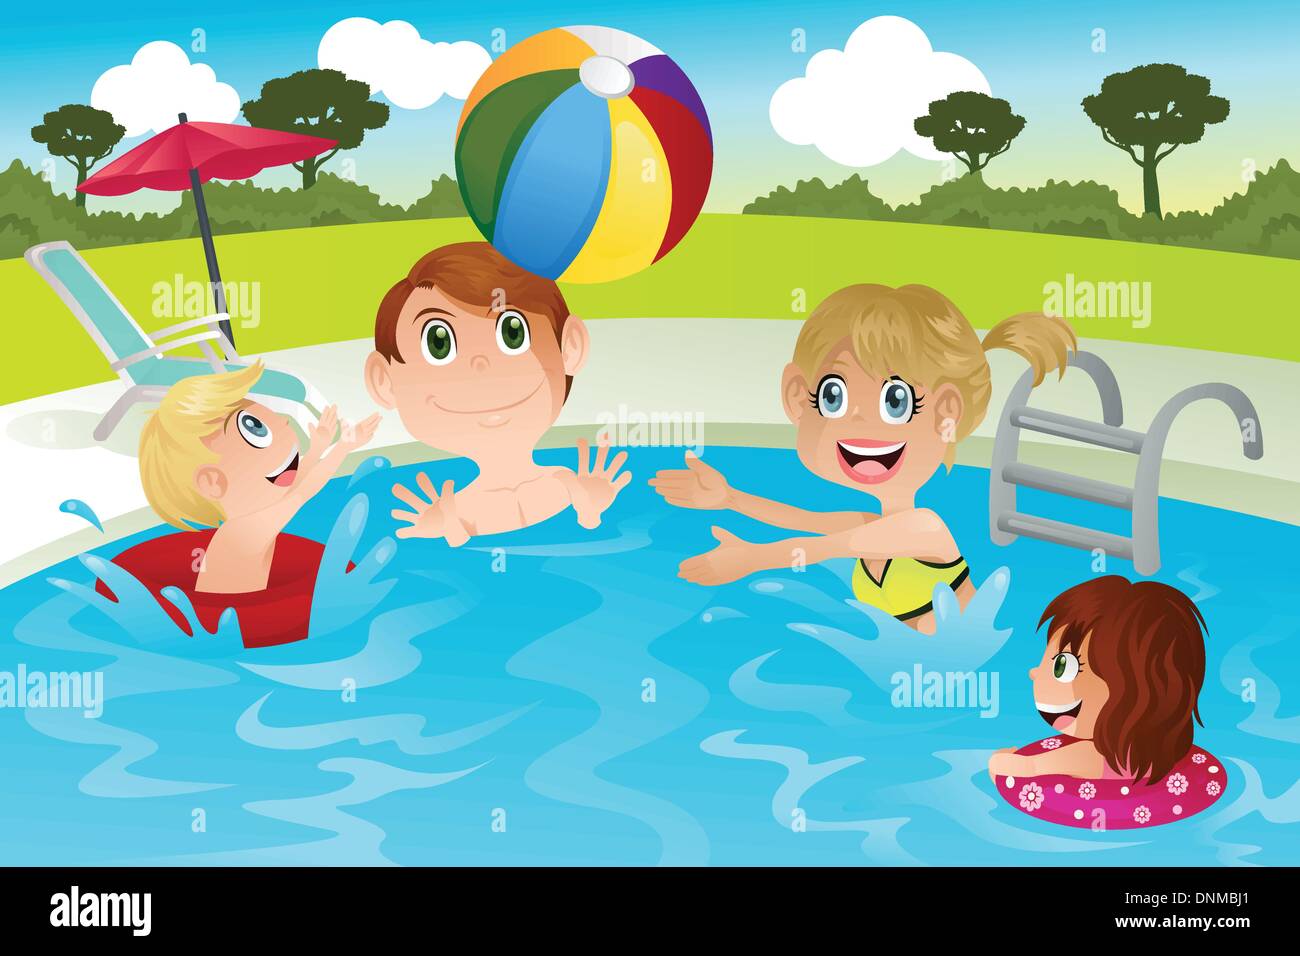 Download A vector illustration of a happy family playing in ...